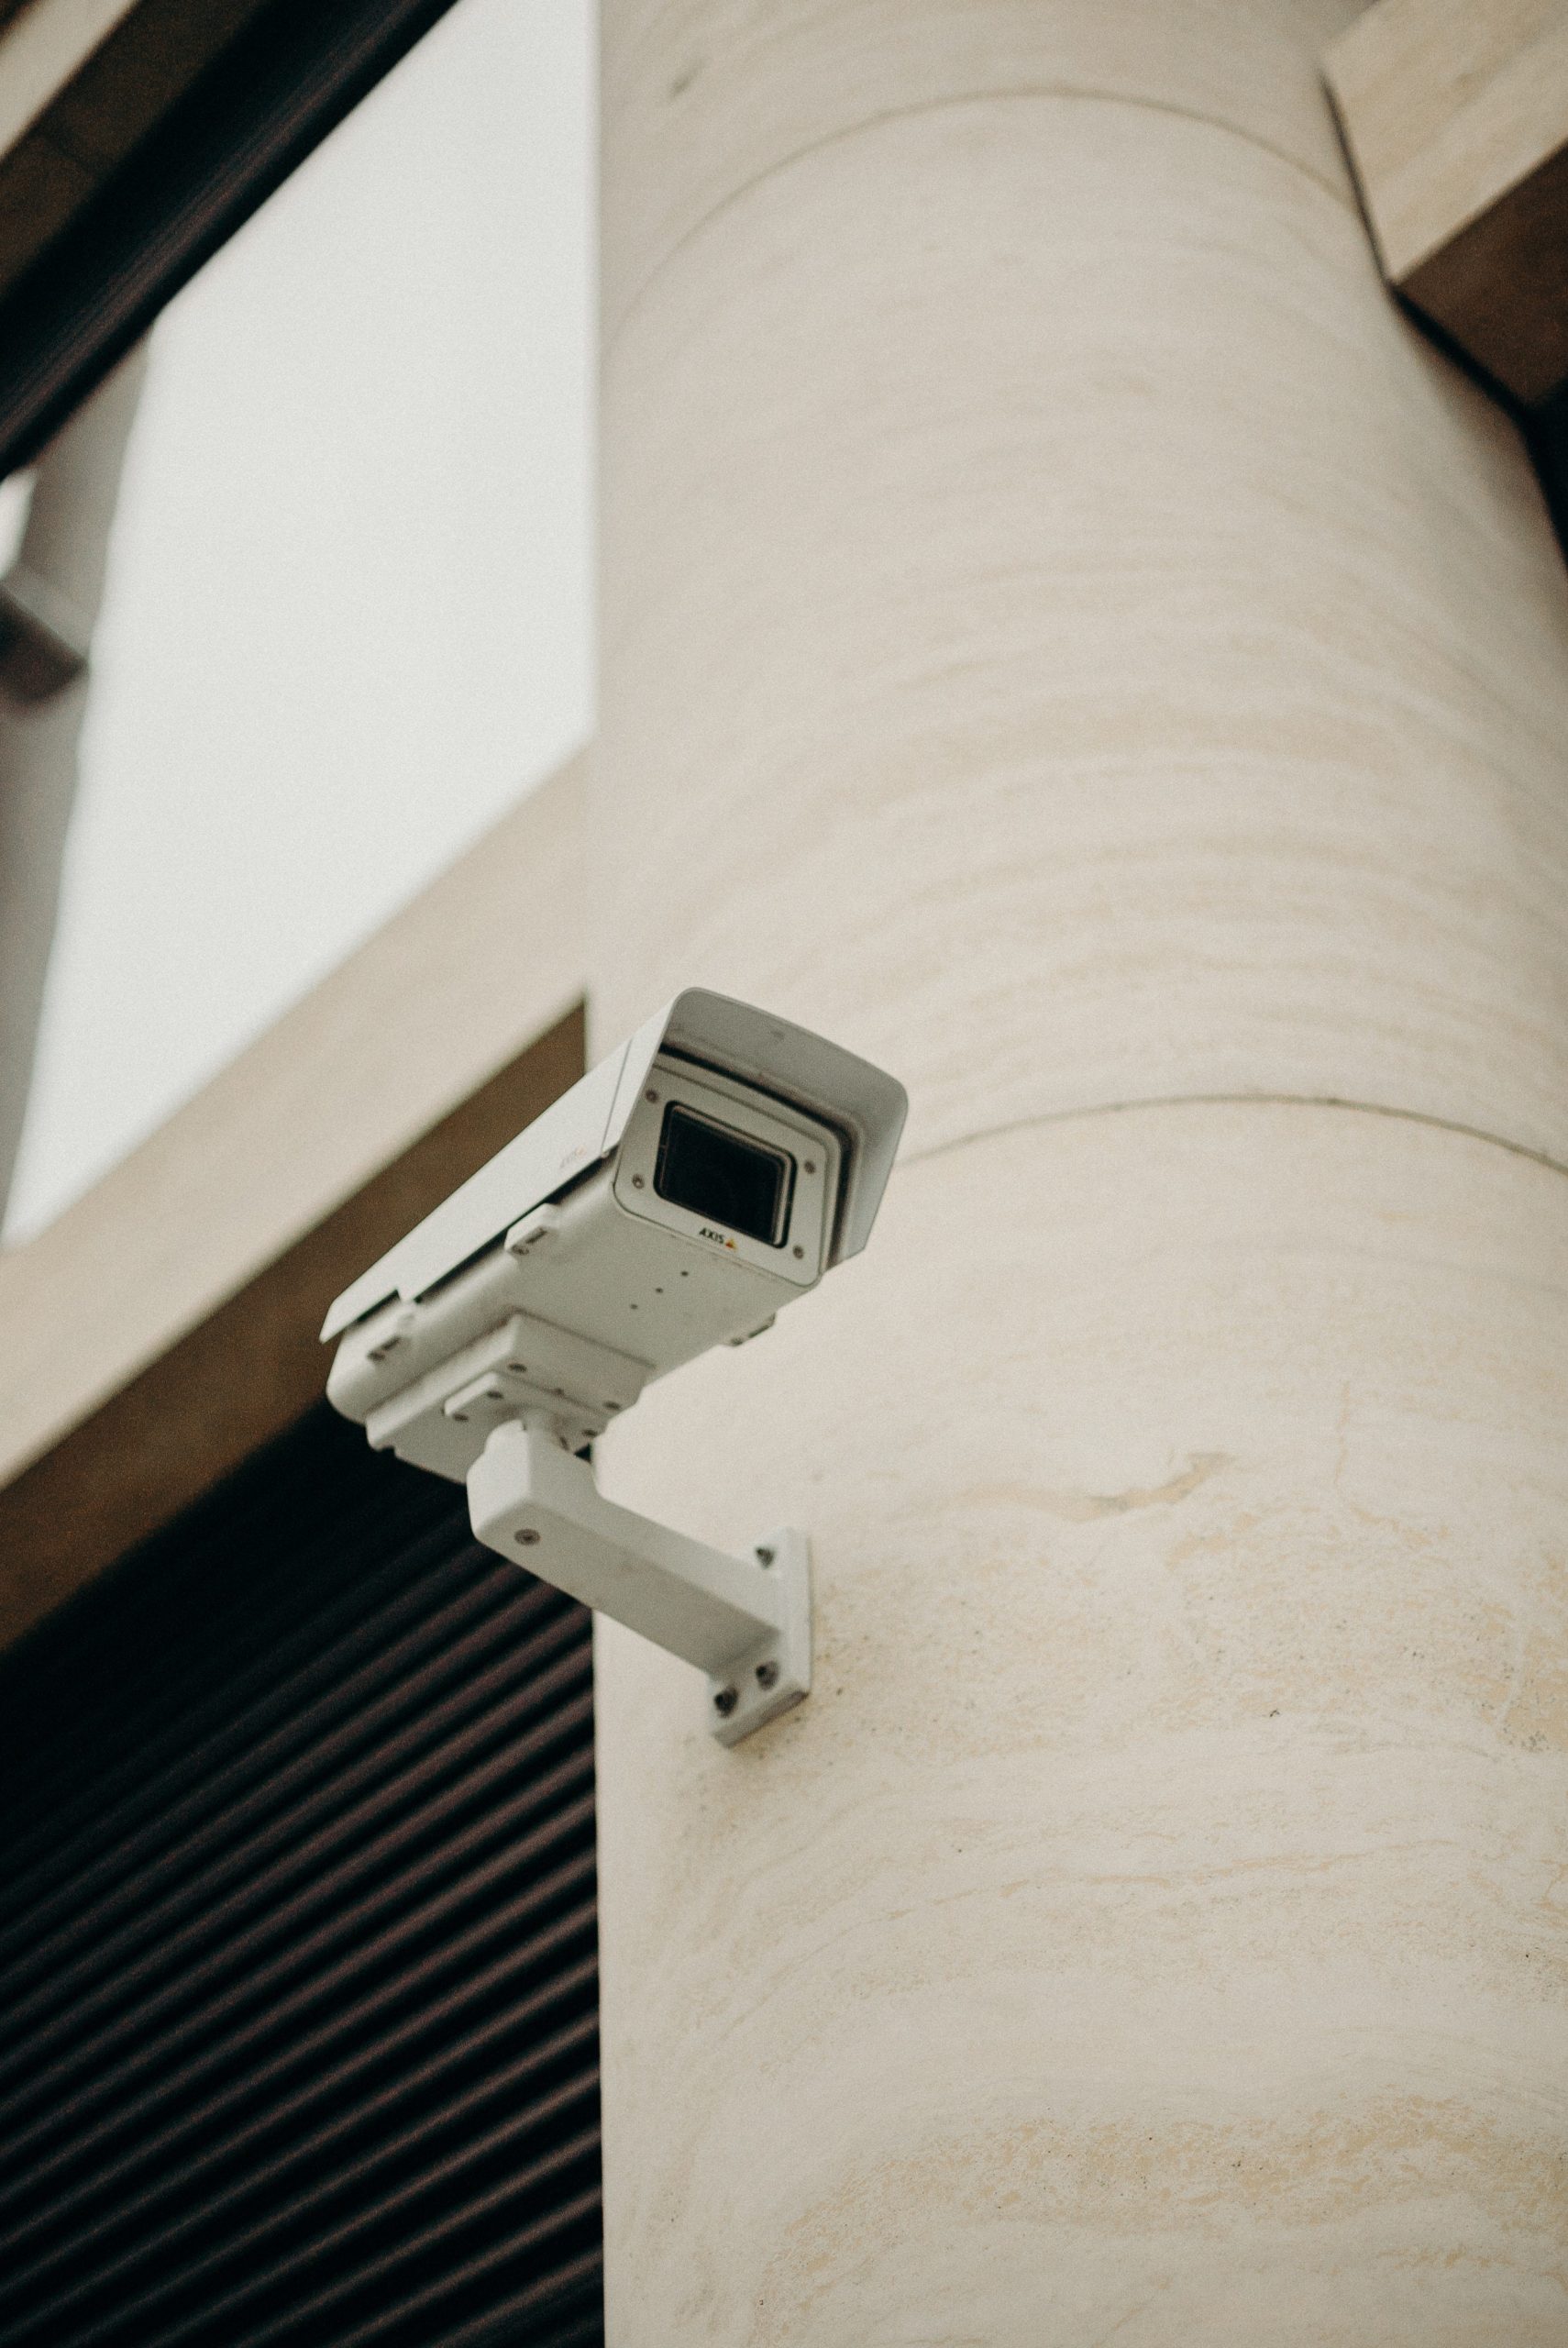 How important is a Surveillance Camera?